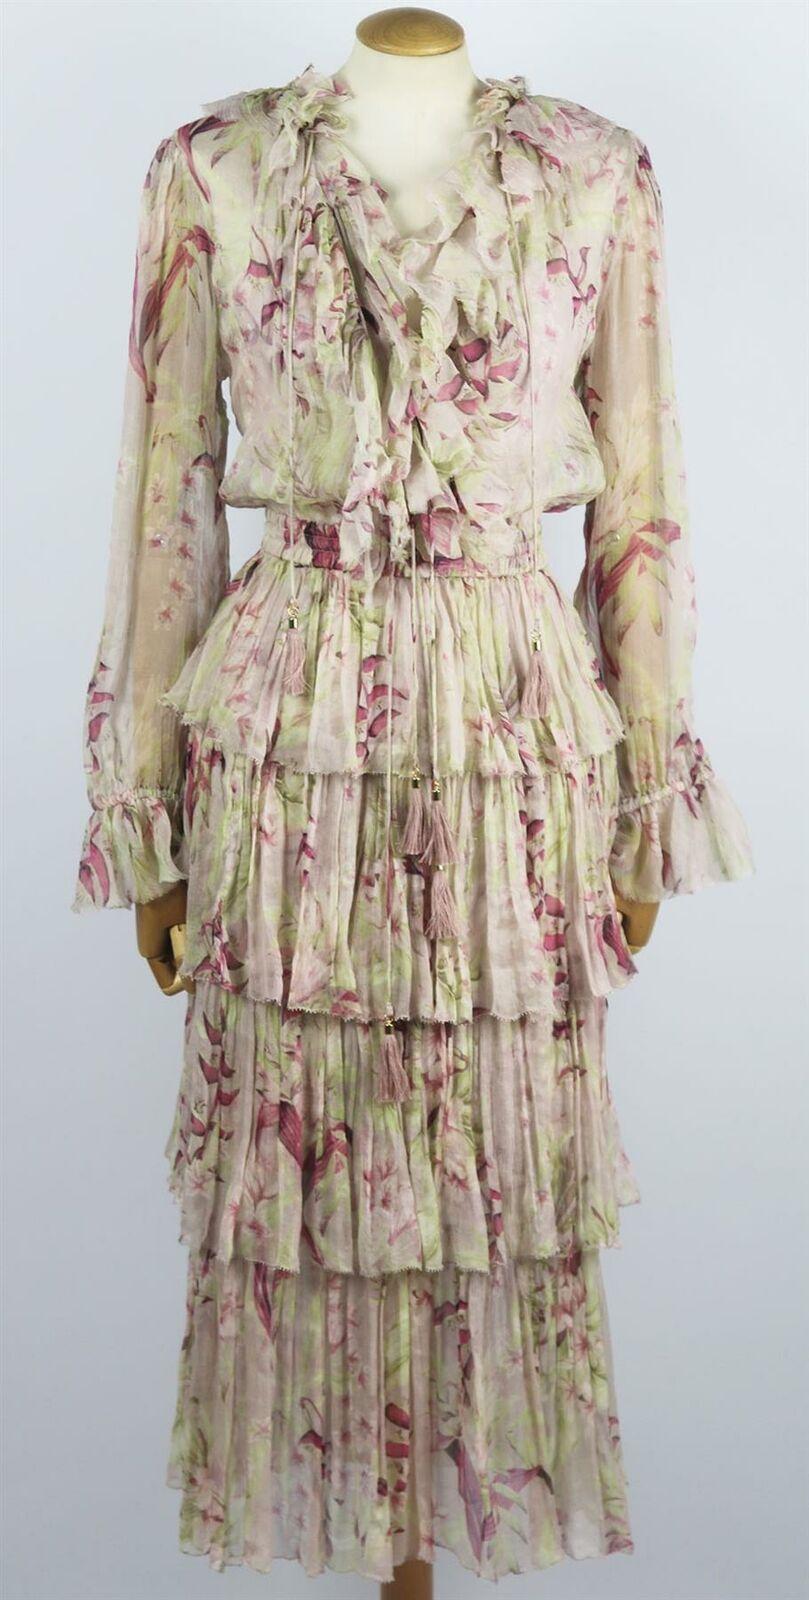 Zimmermann's 'Winsome' dress is cut from whisper-weight crinkled silk-chiffon, this pretty floral design has a ruffle-trimmed neckline and falls to a floaty, tiered midi skirt, the elasticated band flatteringly cinches the waist, while the